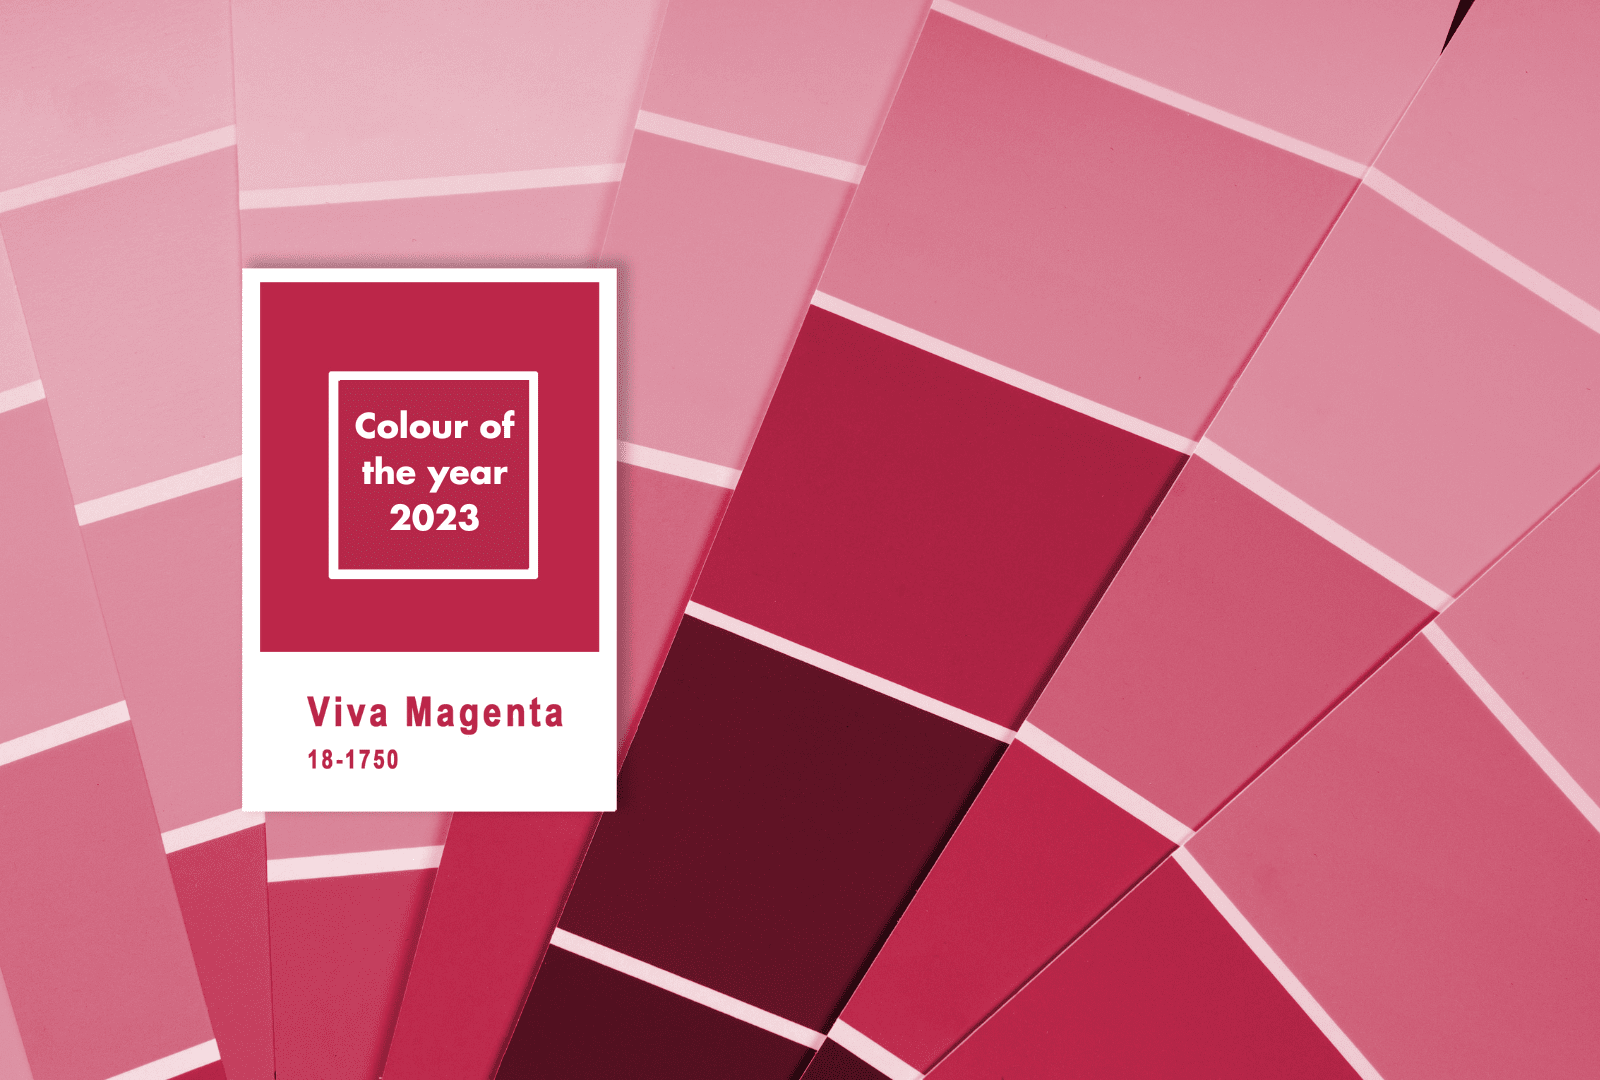 Viva Magenta: A Vibrant and Versatile Choice for Your Home Furniture and Décor